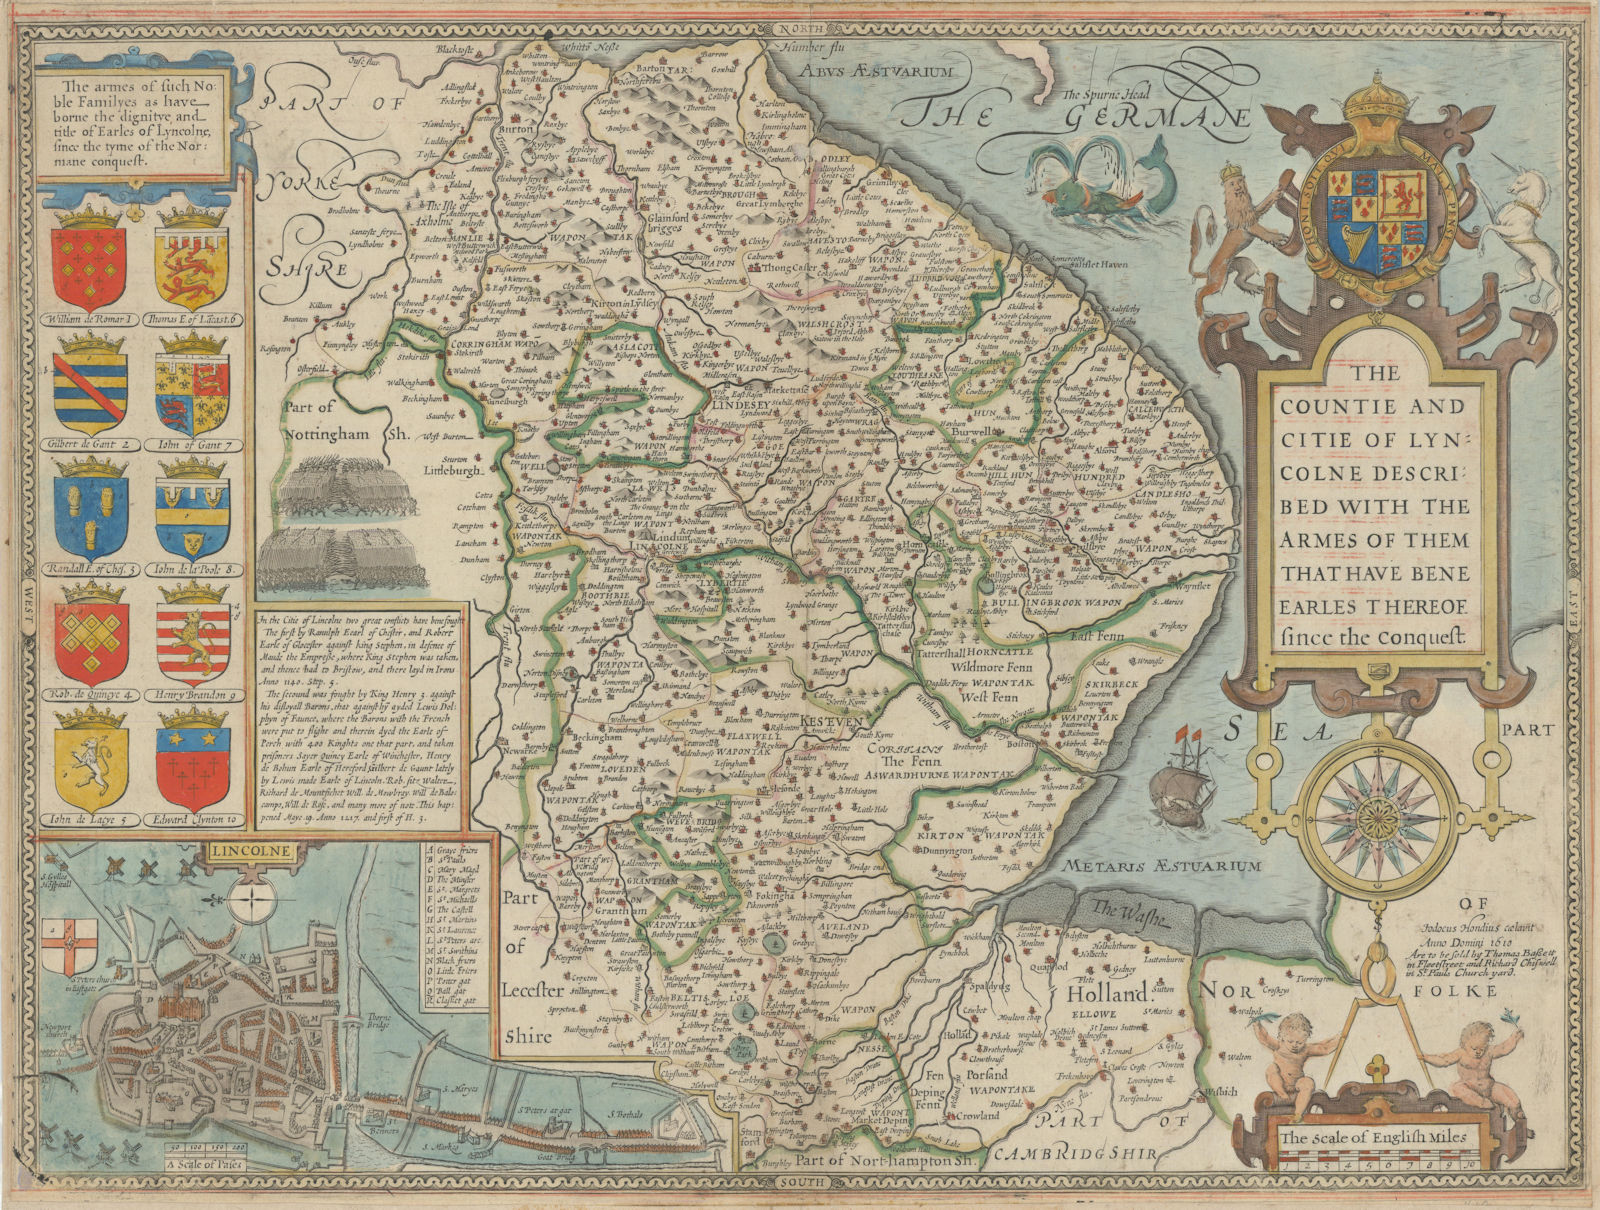 Associate Product Countie of Lyncolne. Lincolnshire county map by Speed. Bassett/Chiswell ed. 1676